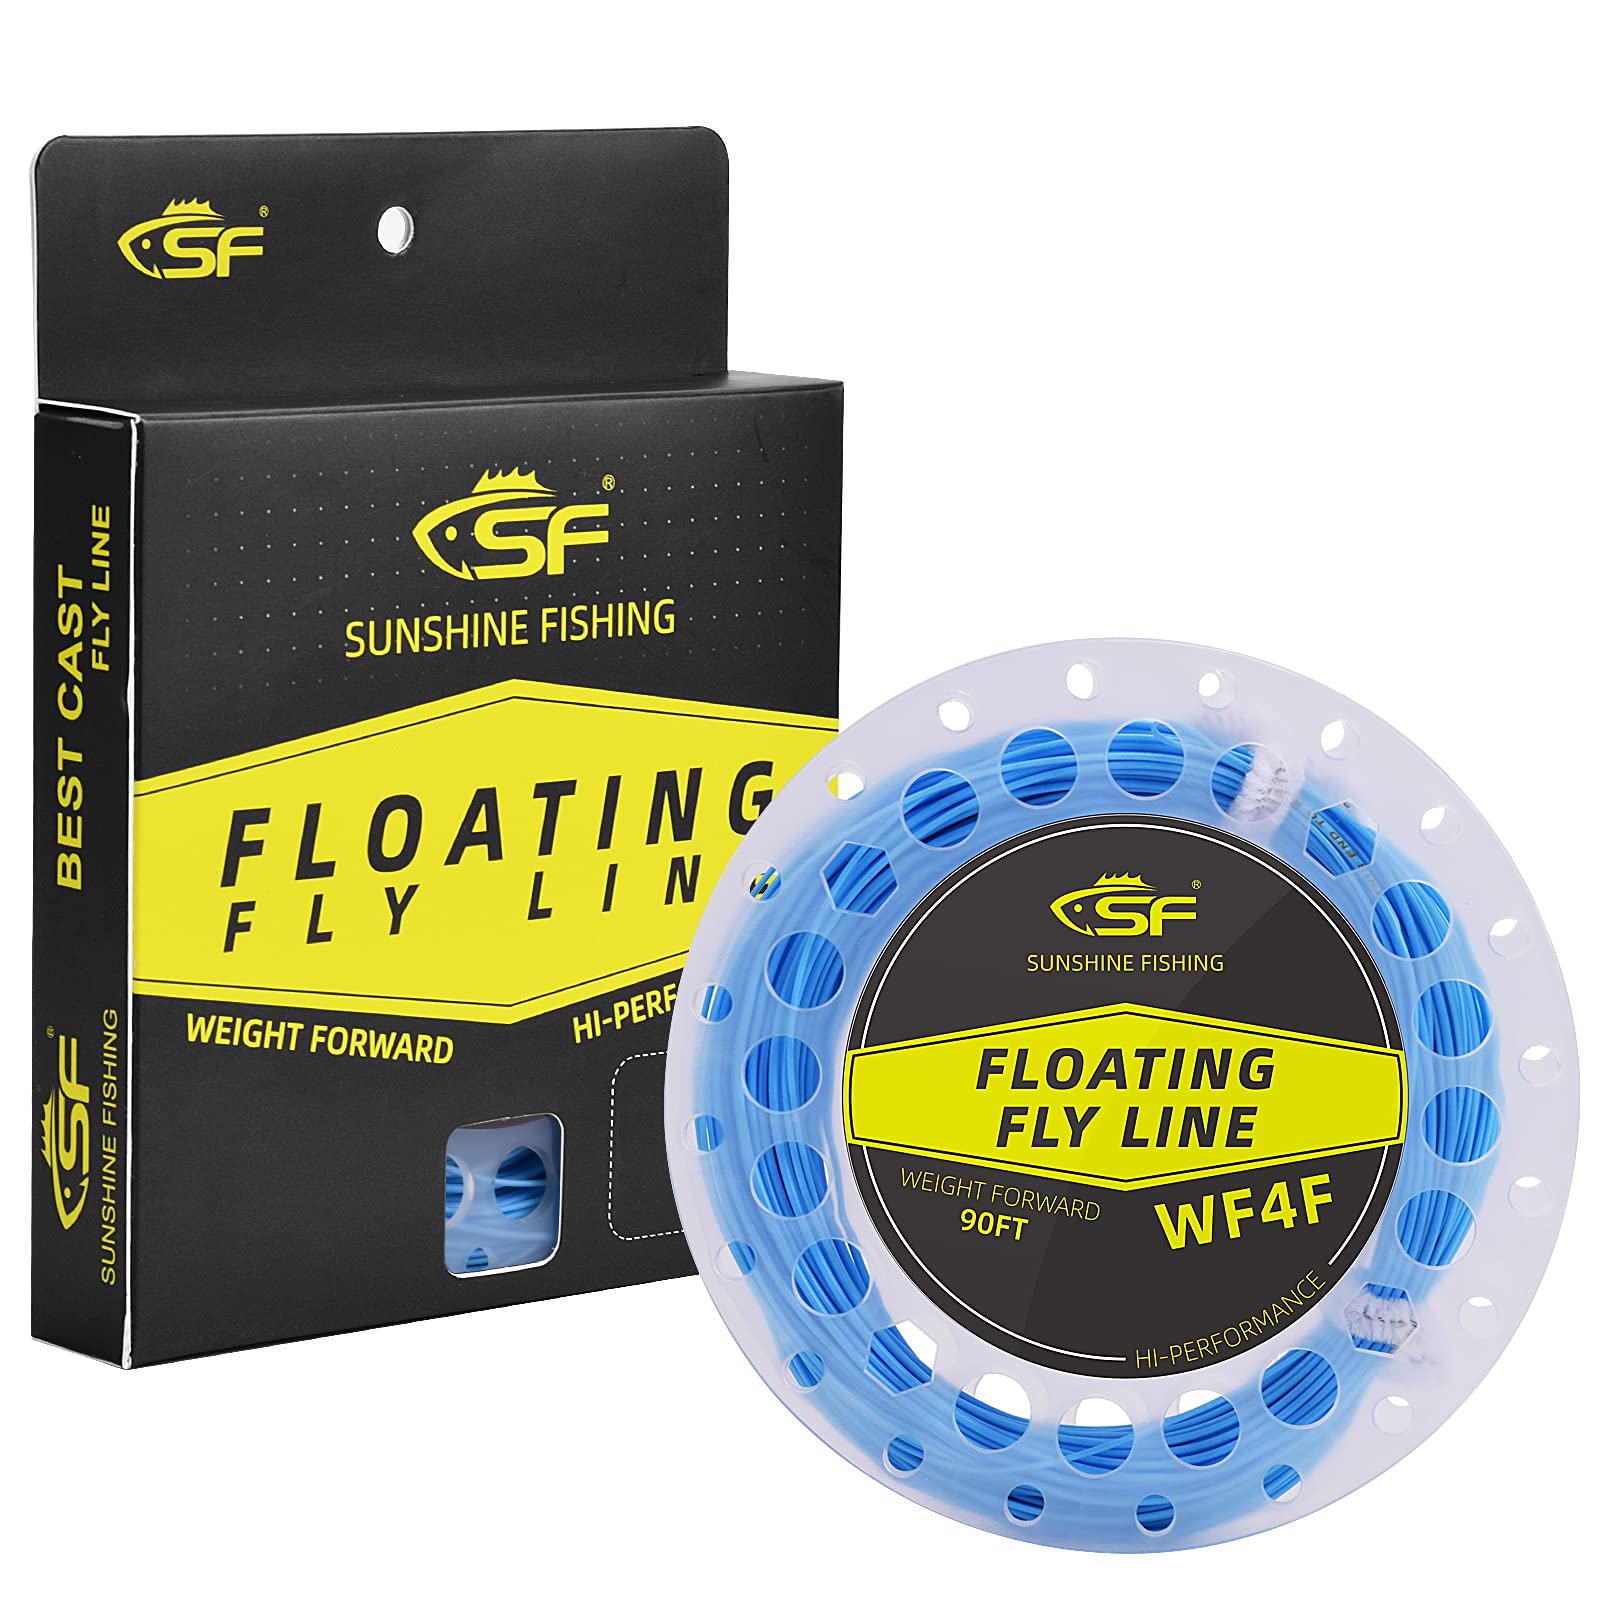 Fly Line 3 Weight Forward, Floating Fly Fishing Line